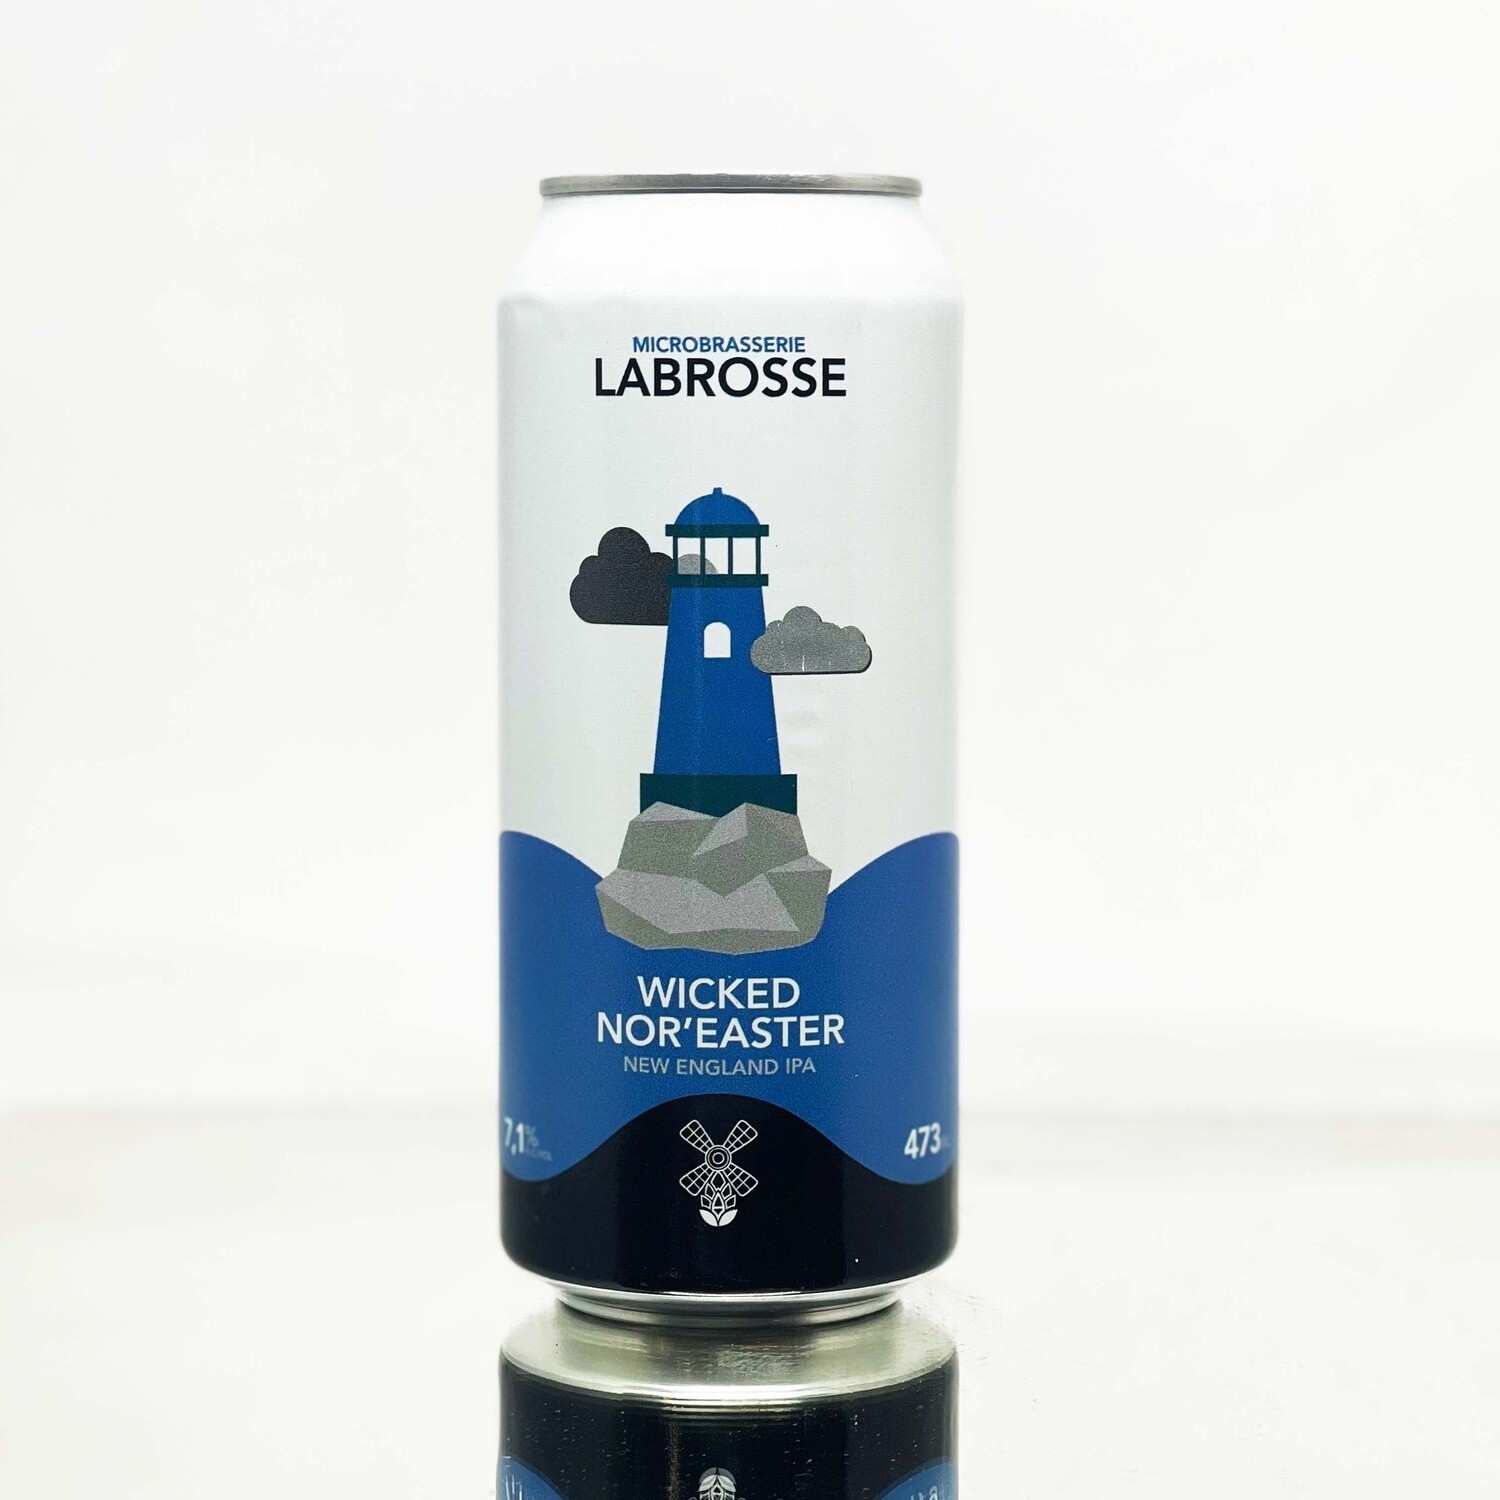 Labrosse - Wicked Nor'Easter